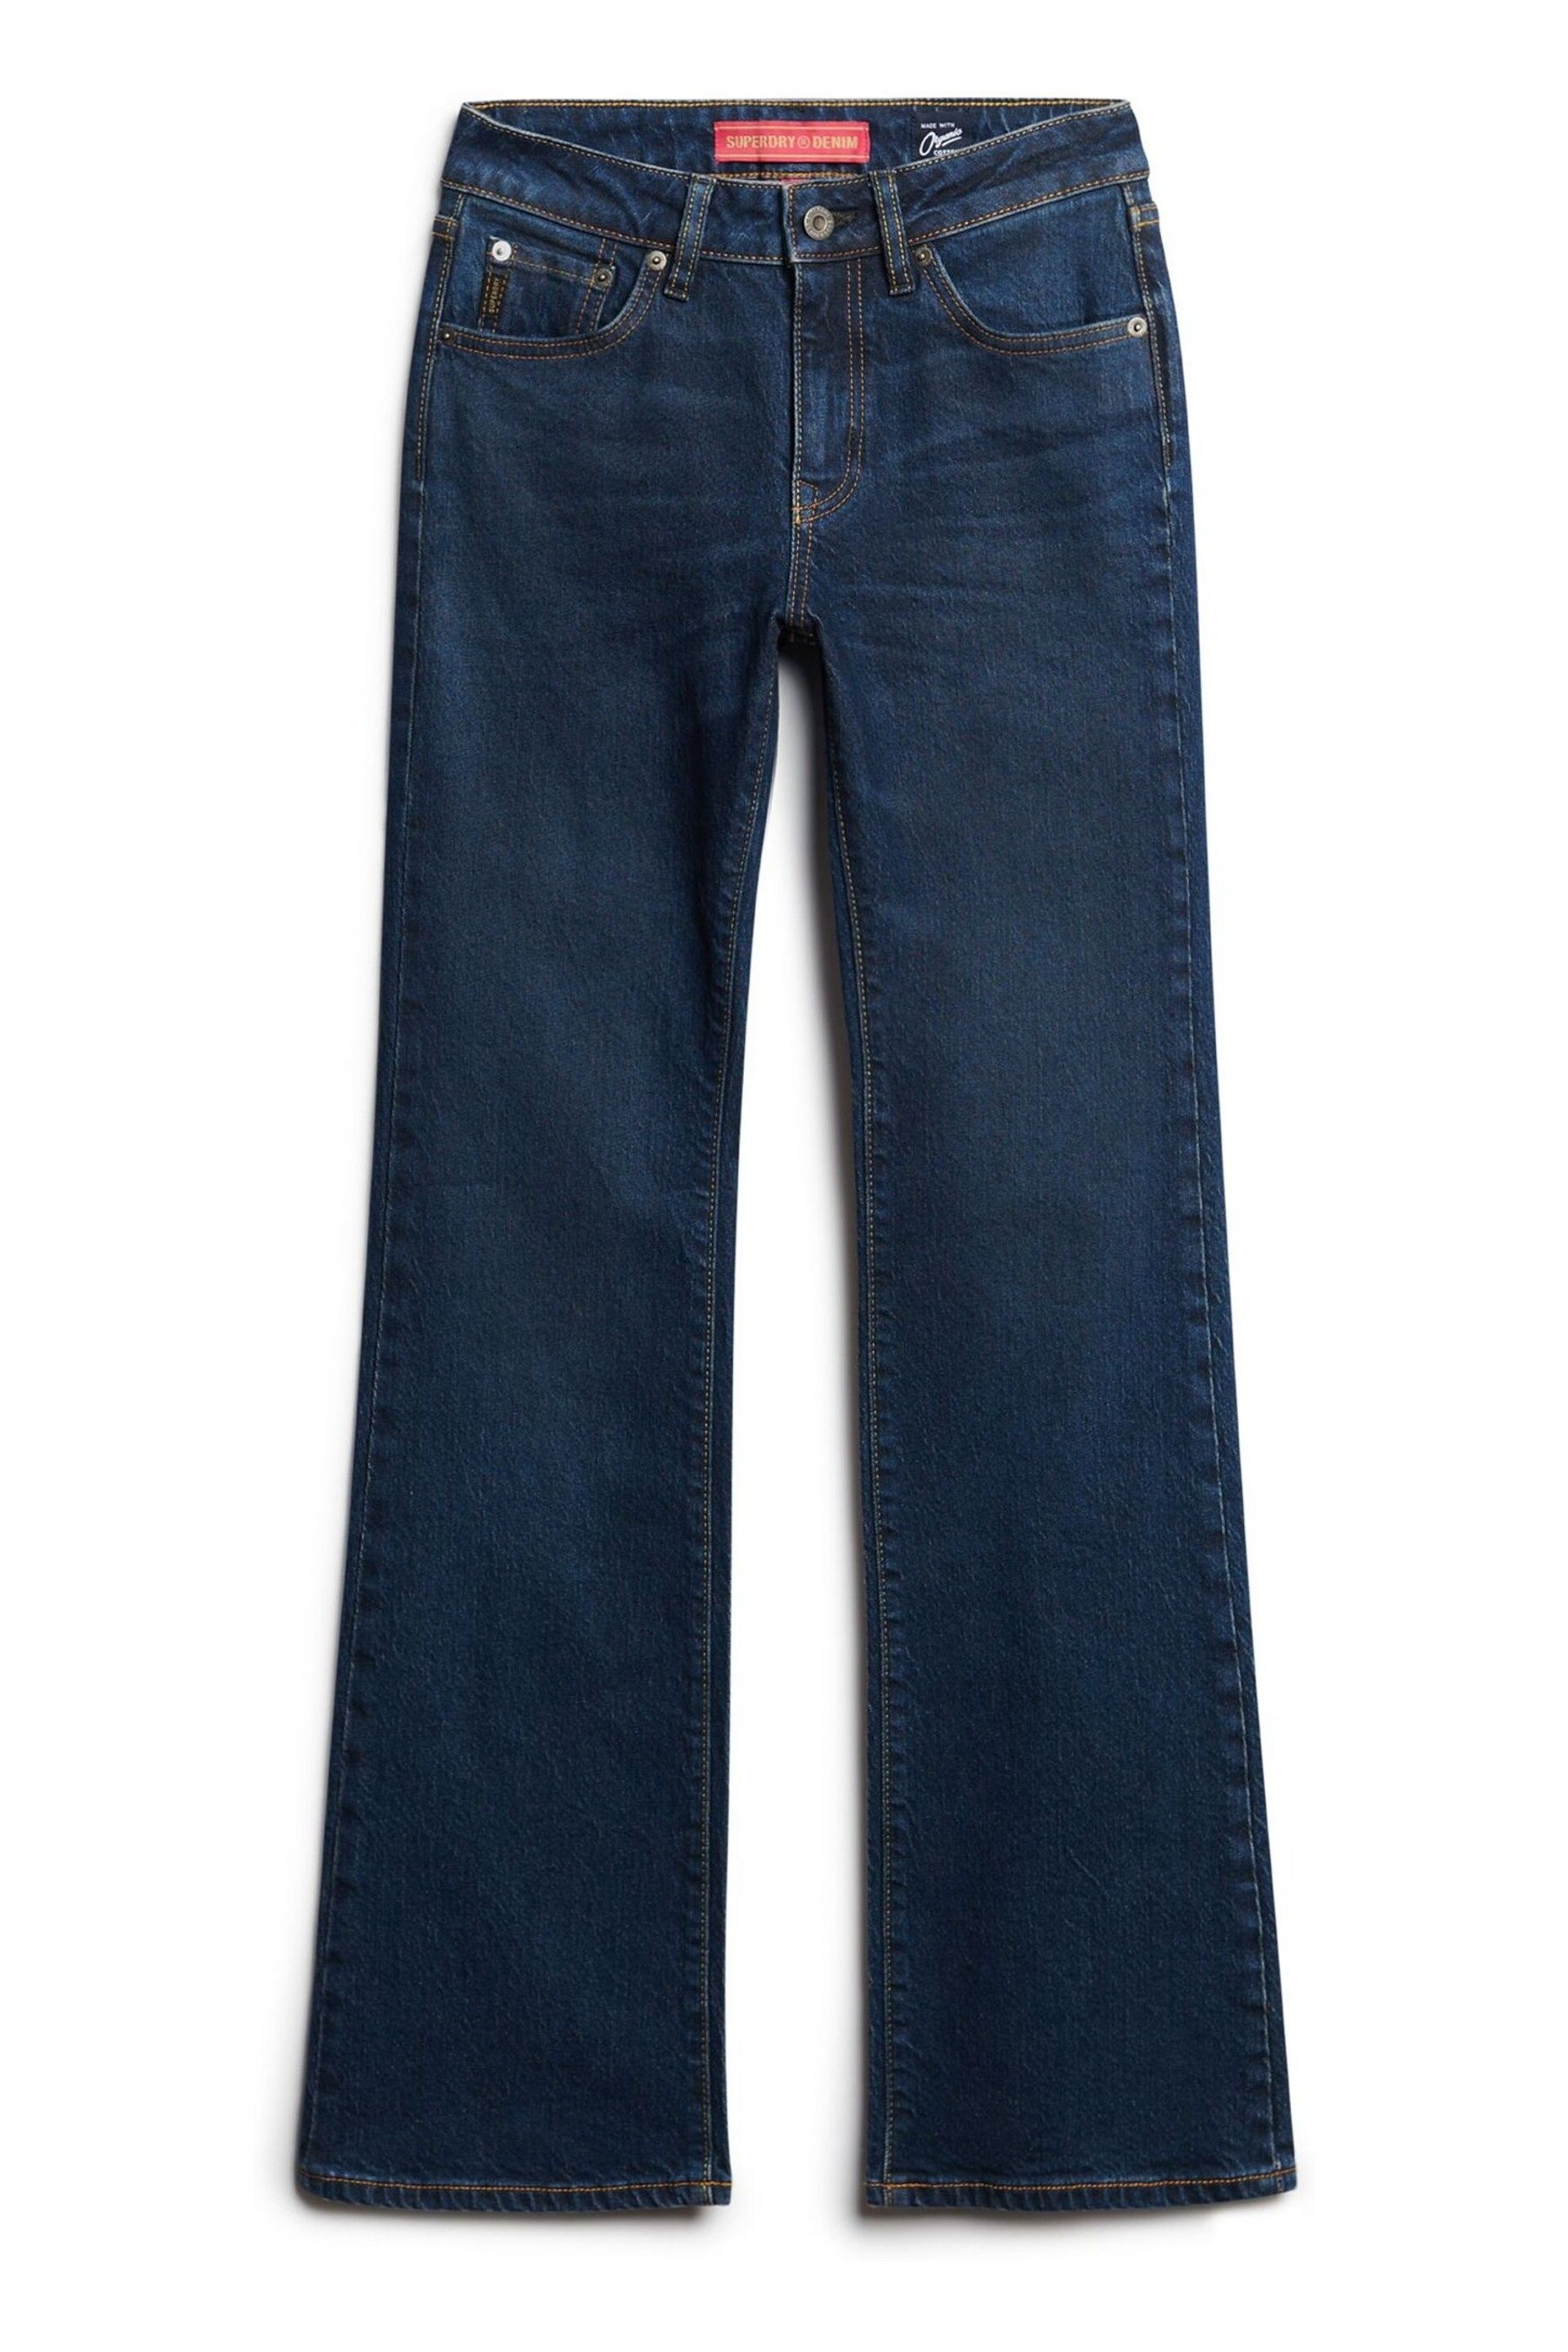 Superdry Blue Mid Rise Slim Flare Jeans - Image 7 of 8